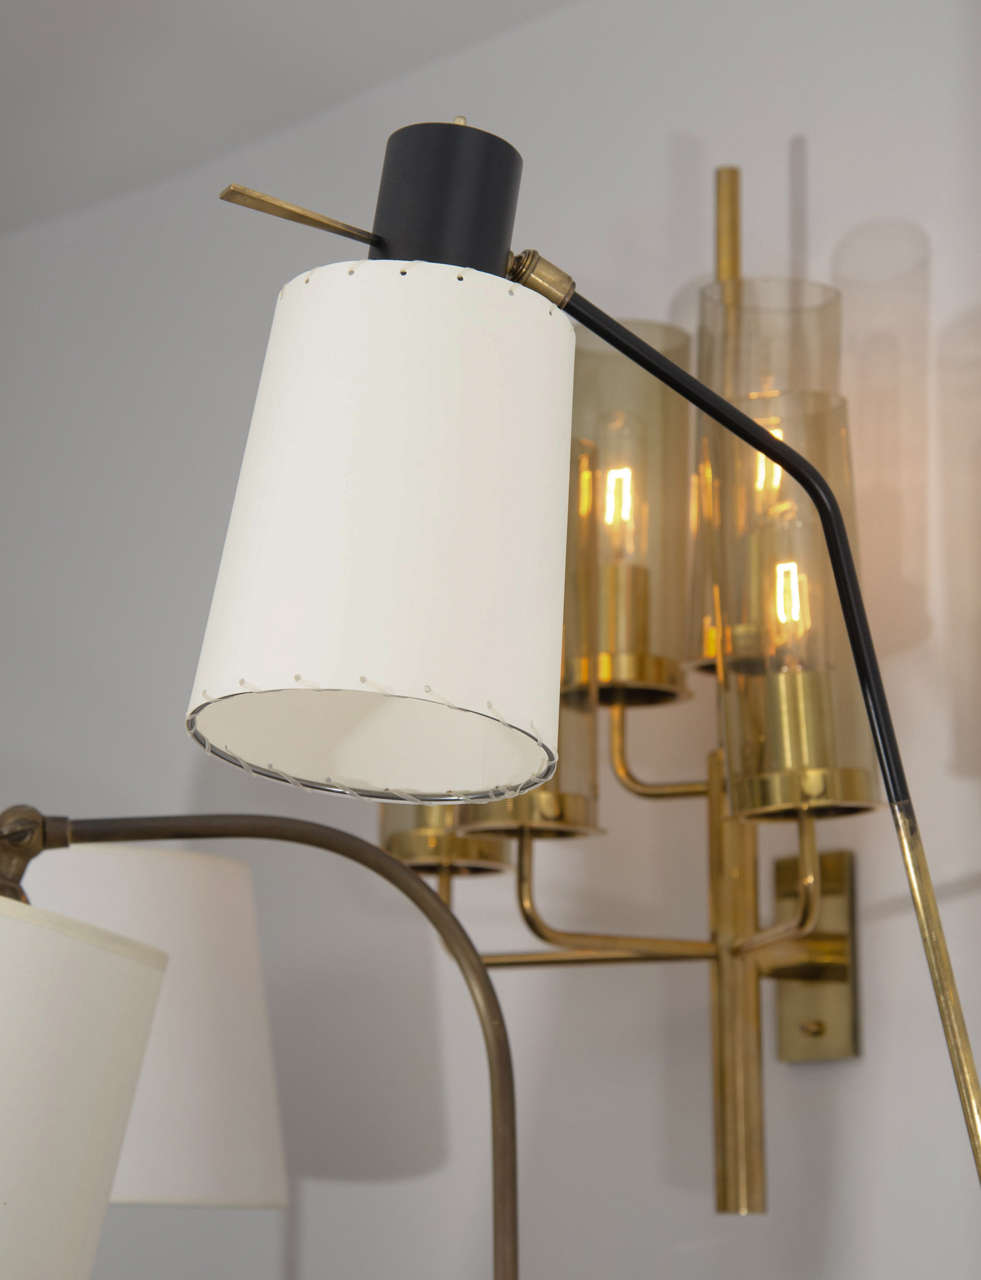 Upright sconces by Boris Lacroix with articulated shades. The stem moves horizontally and the shades with full range of motion. Brass with black powder coated details and new shades.